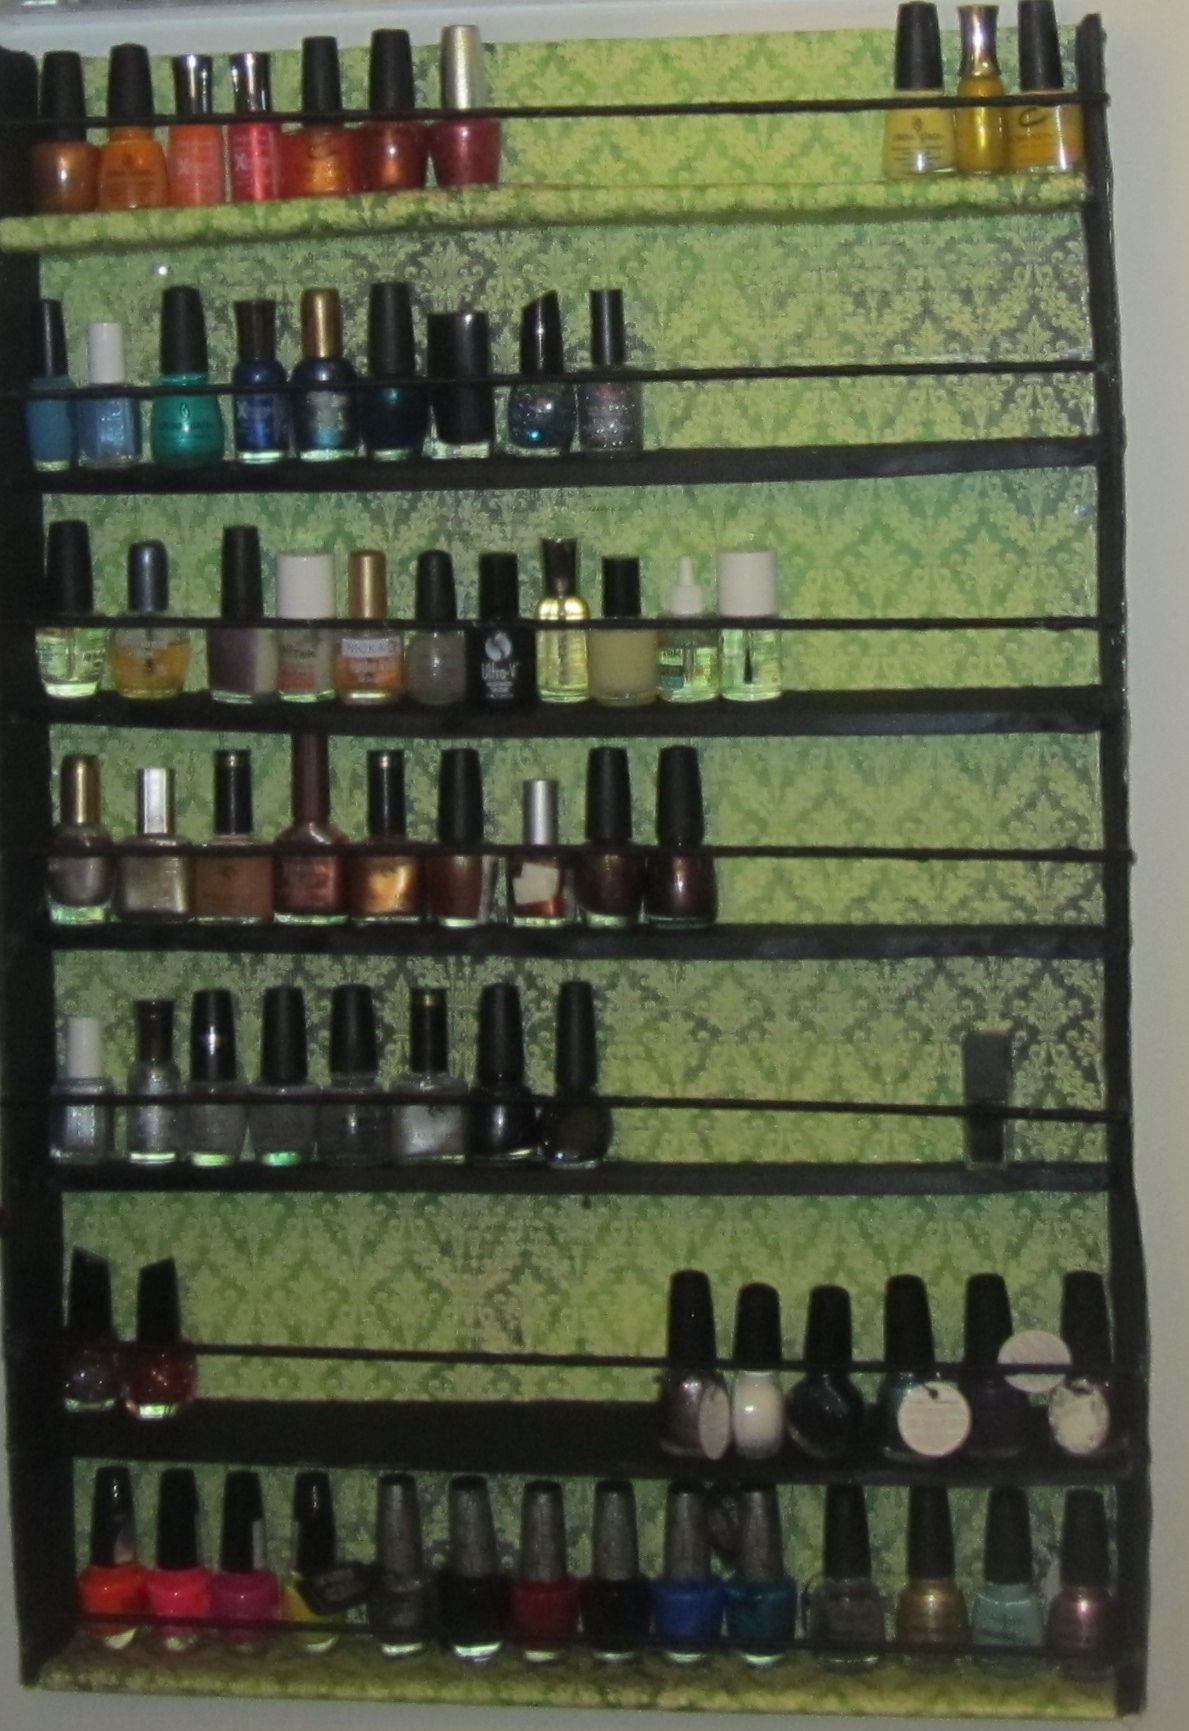 I built my very own nail polish rack. Check out the video for instructions